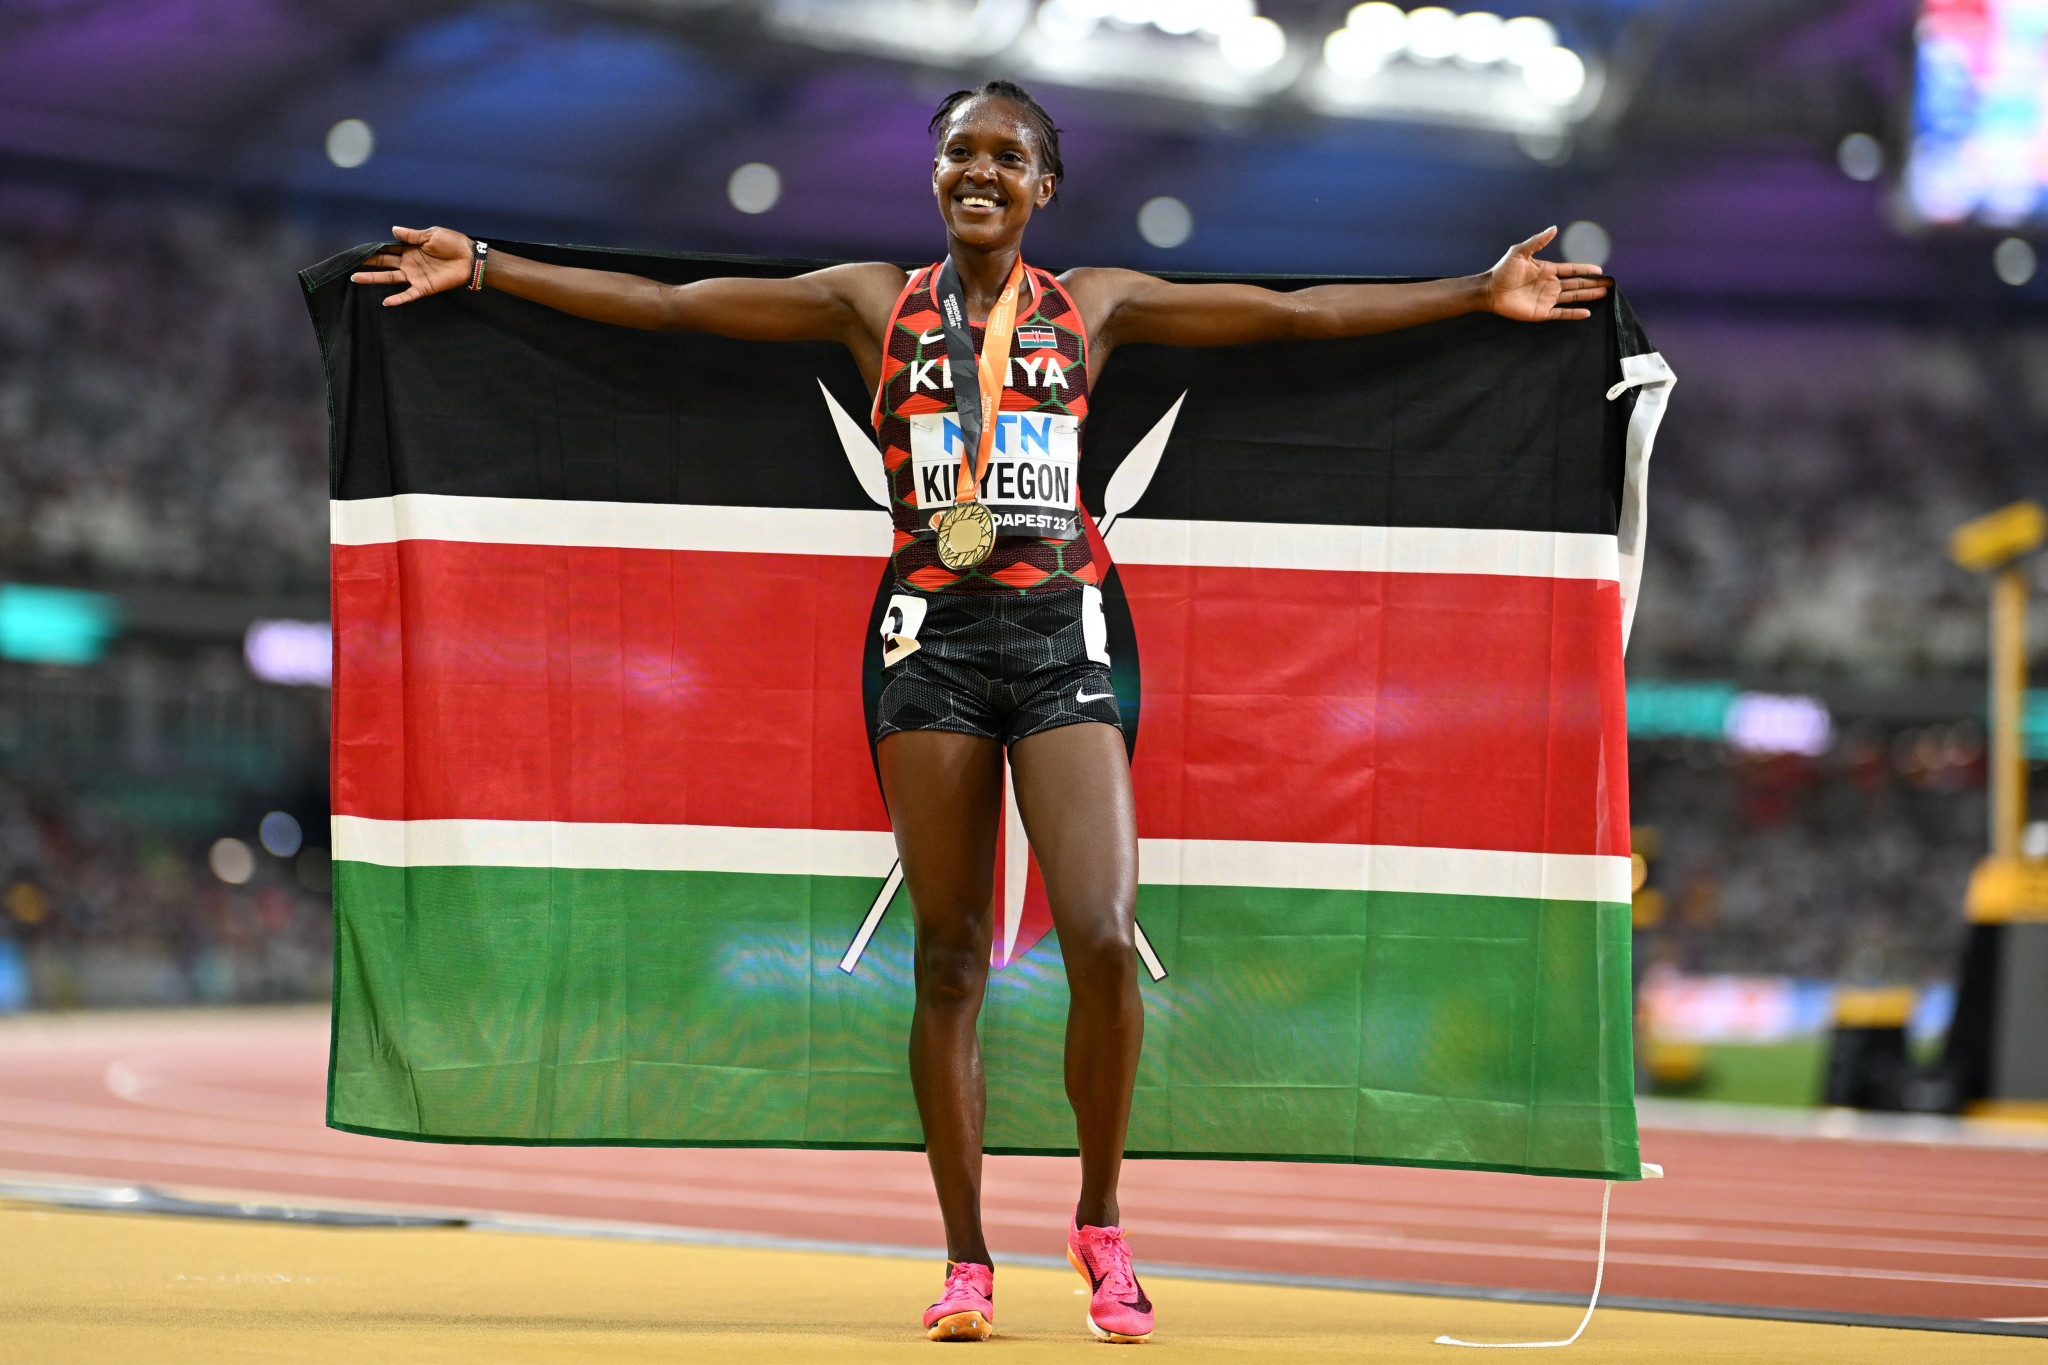 Faith Kipyegon of Kenya claimed a third women's 1500m title with a dominant display in the final ©Getty Images